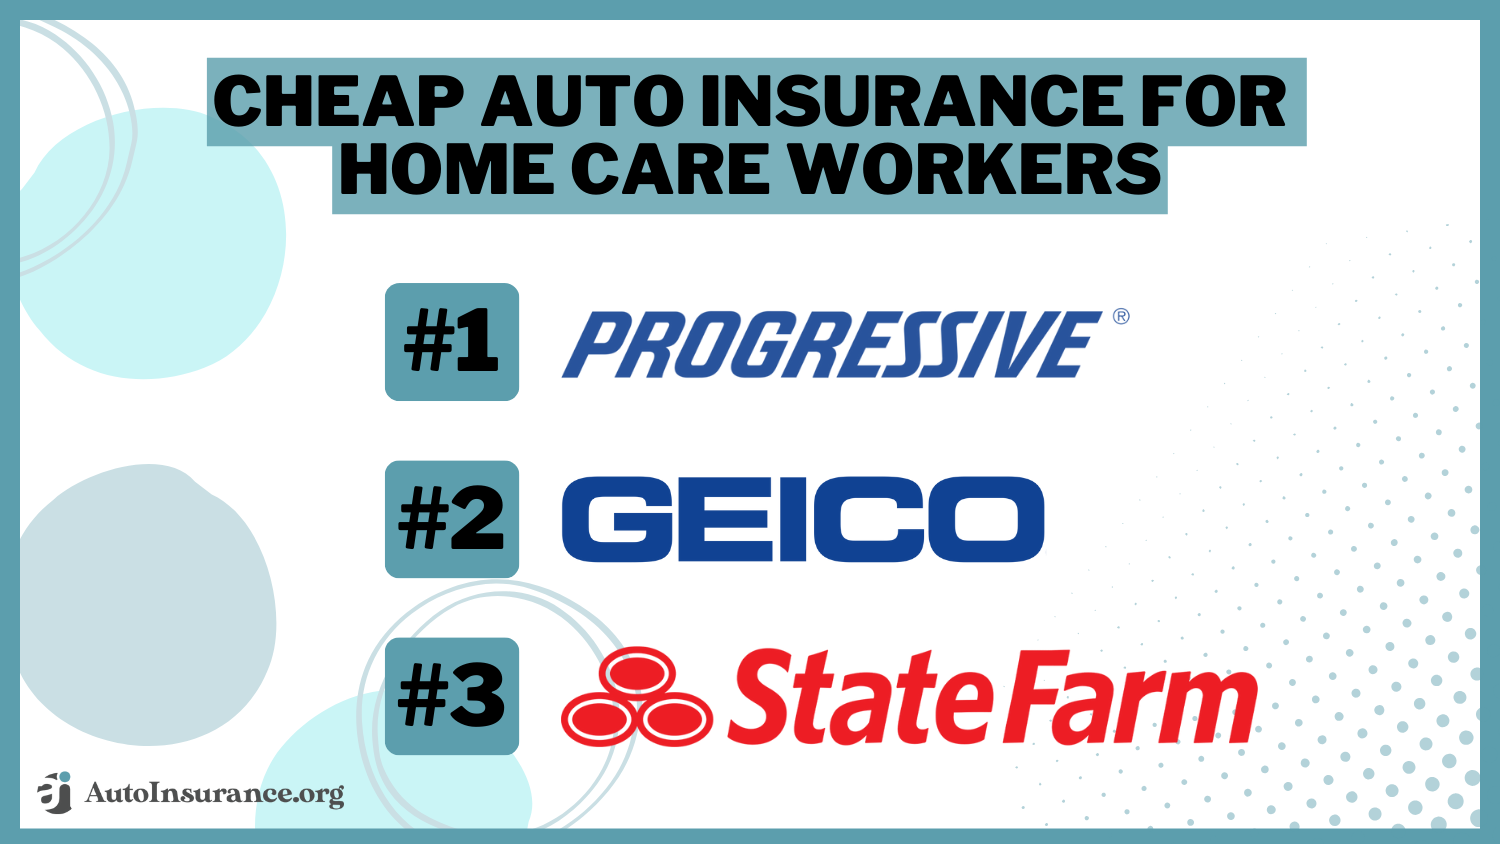 Cheap Auto Insurance for Home Care Workers